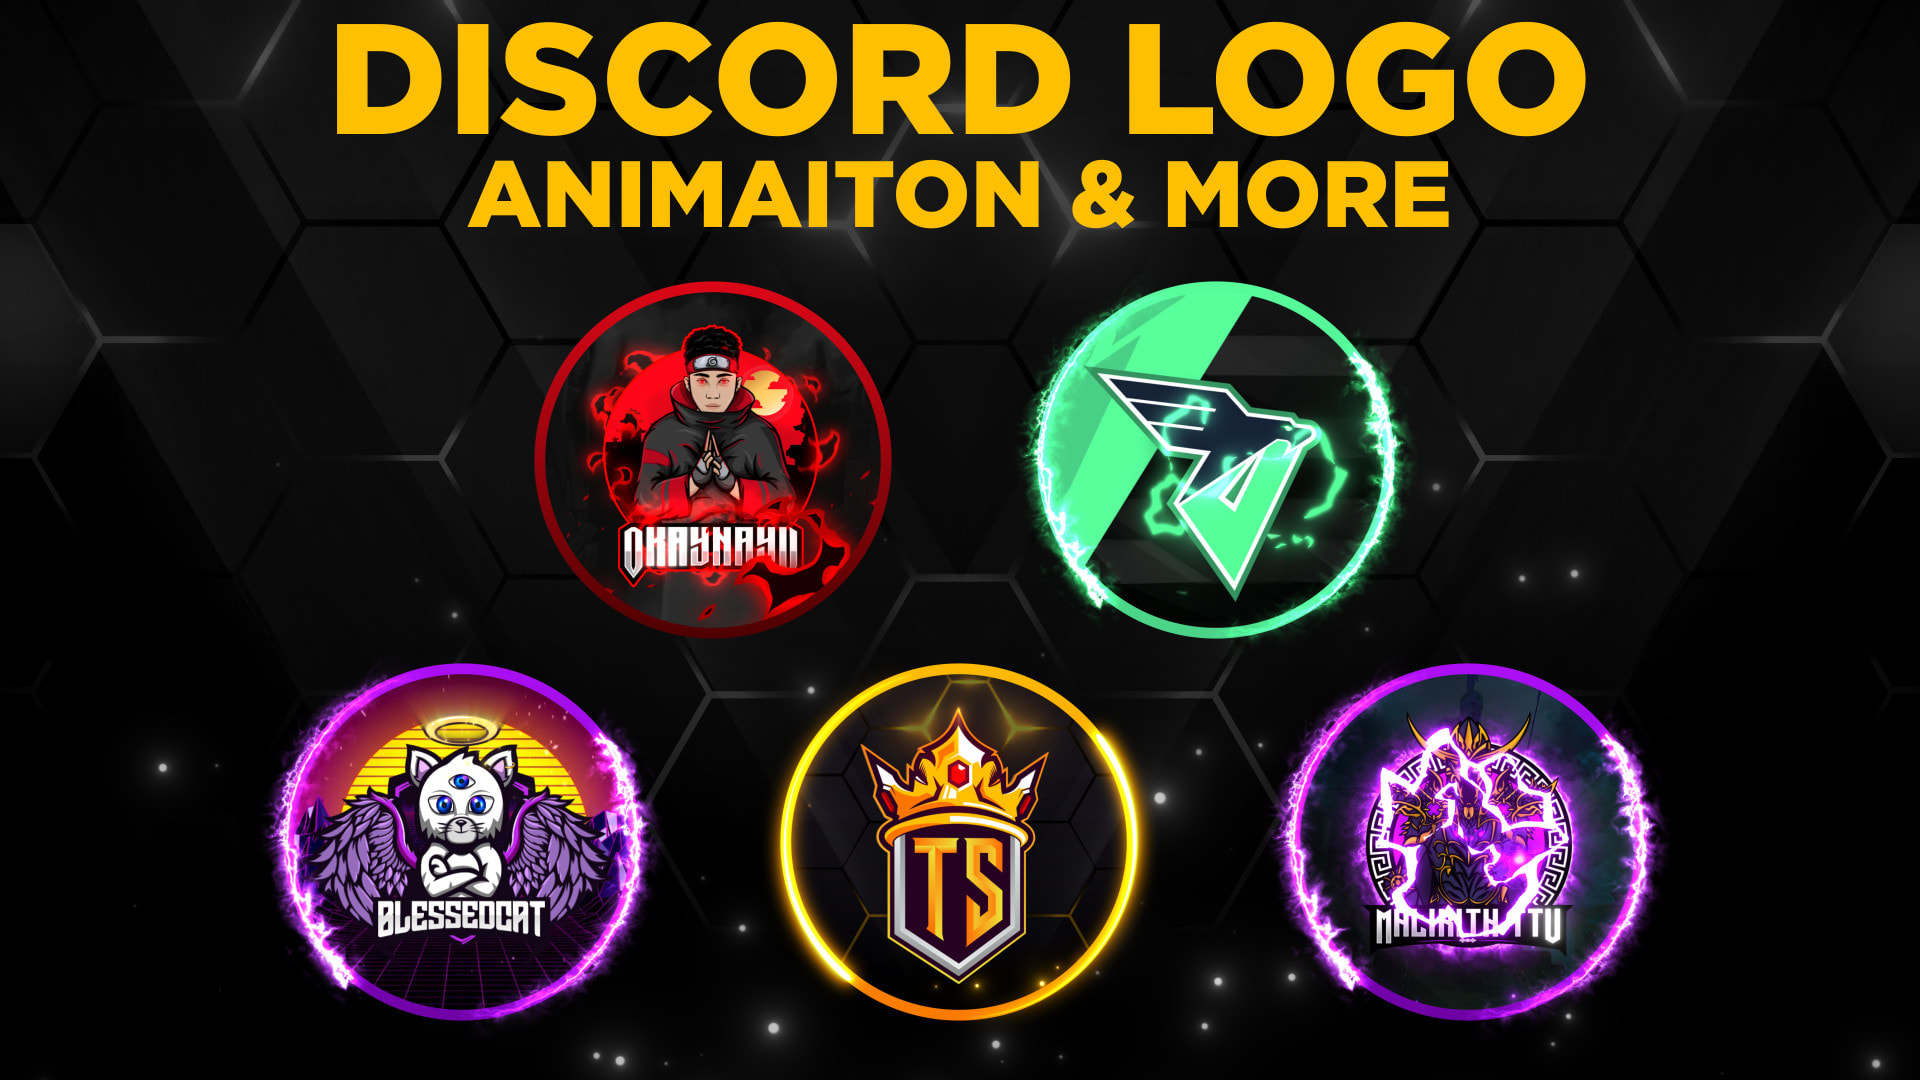 Easy Animated Logos And Banners Maker - Animated Discord Avatars